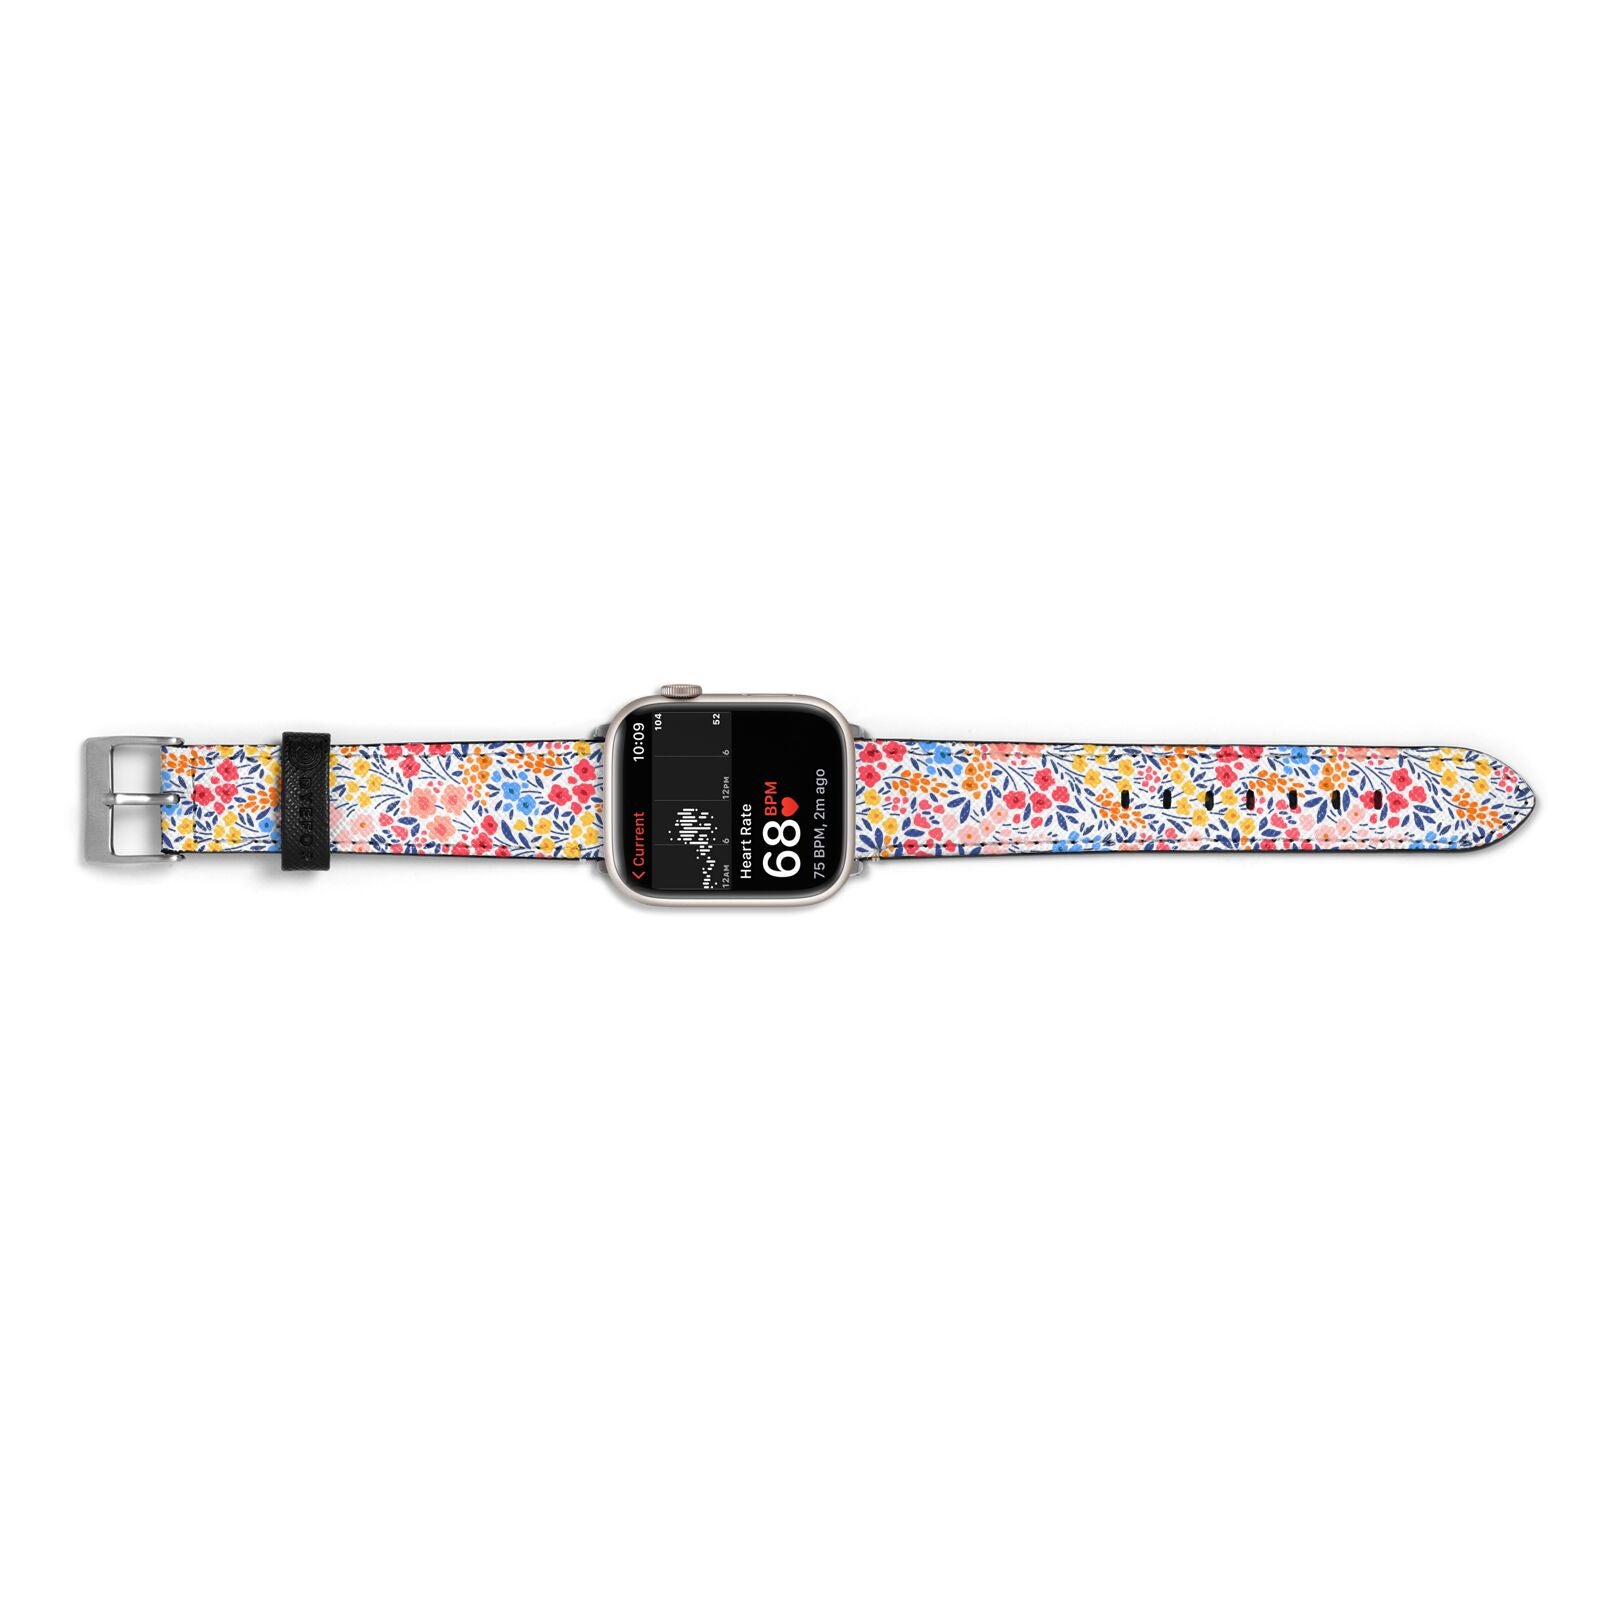 Small Flowers Apple Watch Strap Size 38mm Landscape Image Silver Hardware